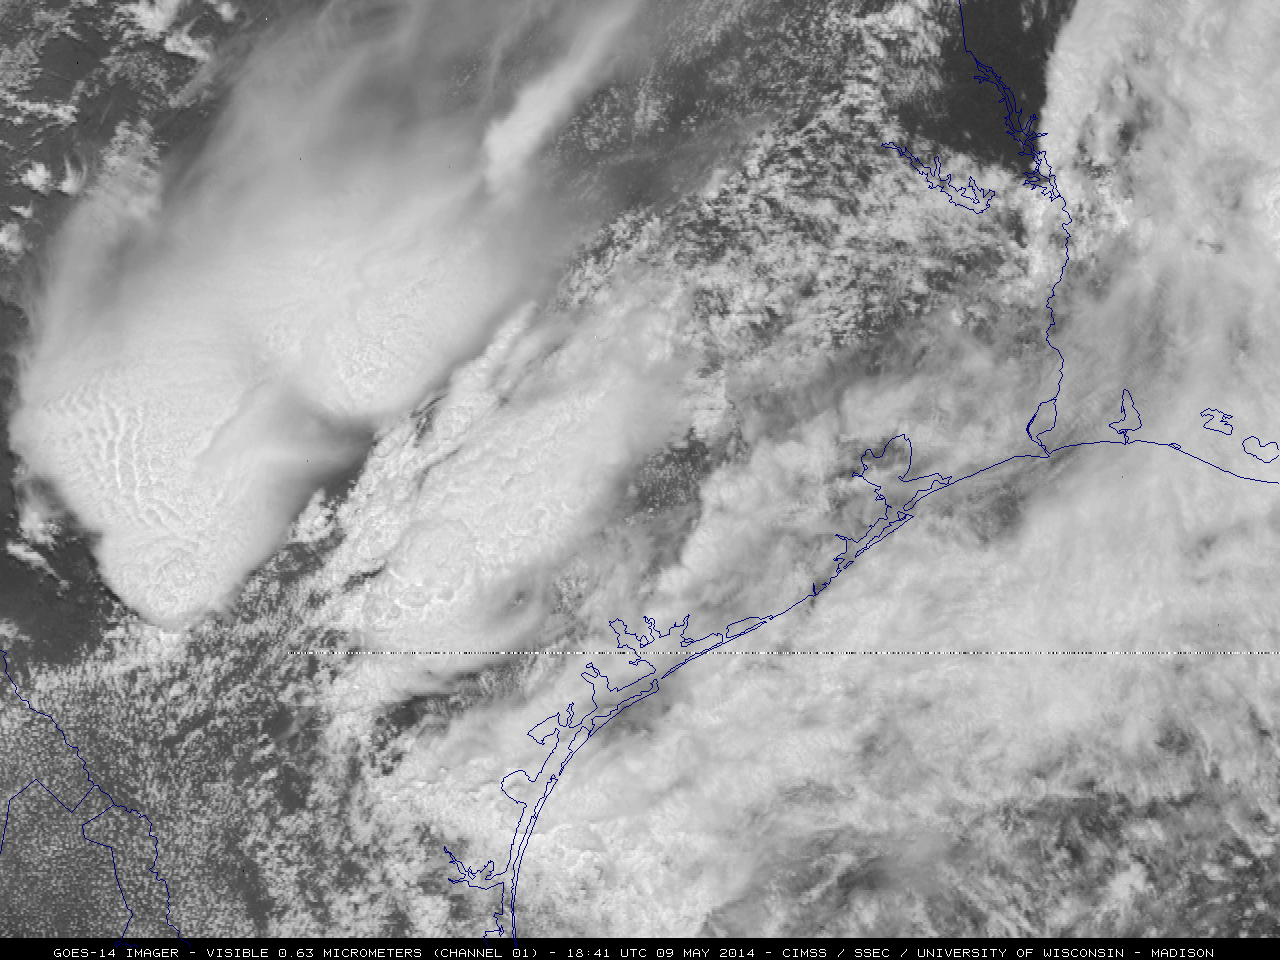 GOES-14 0.63 µm visible channel images (click to play animation)